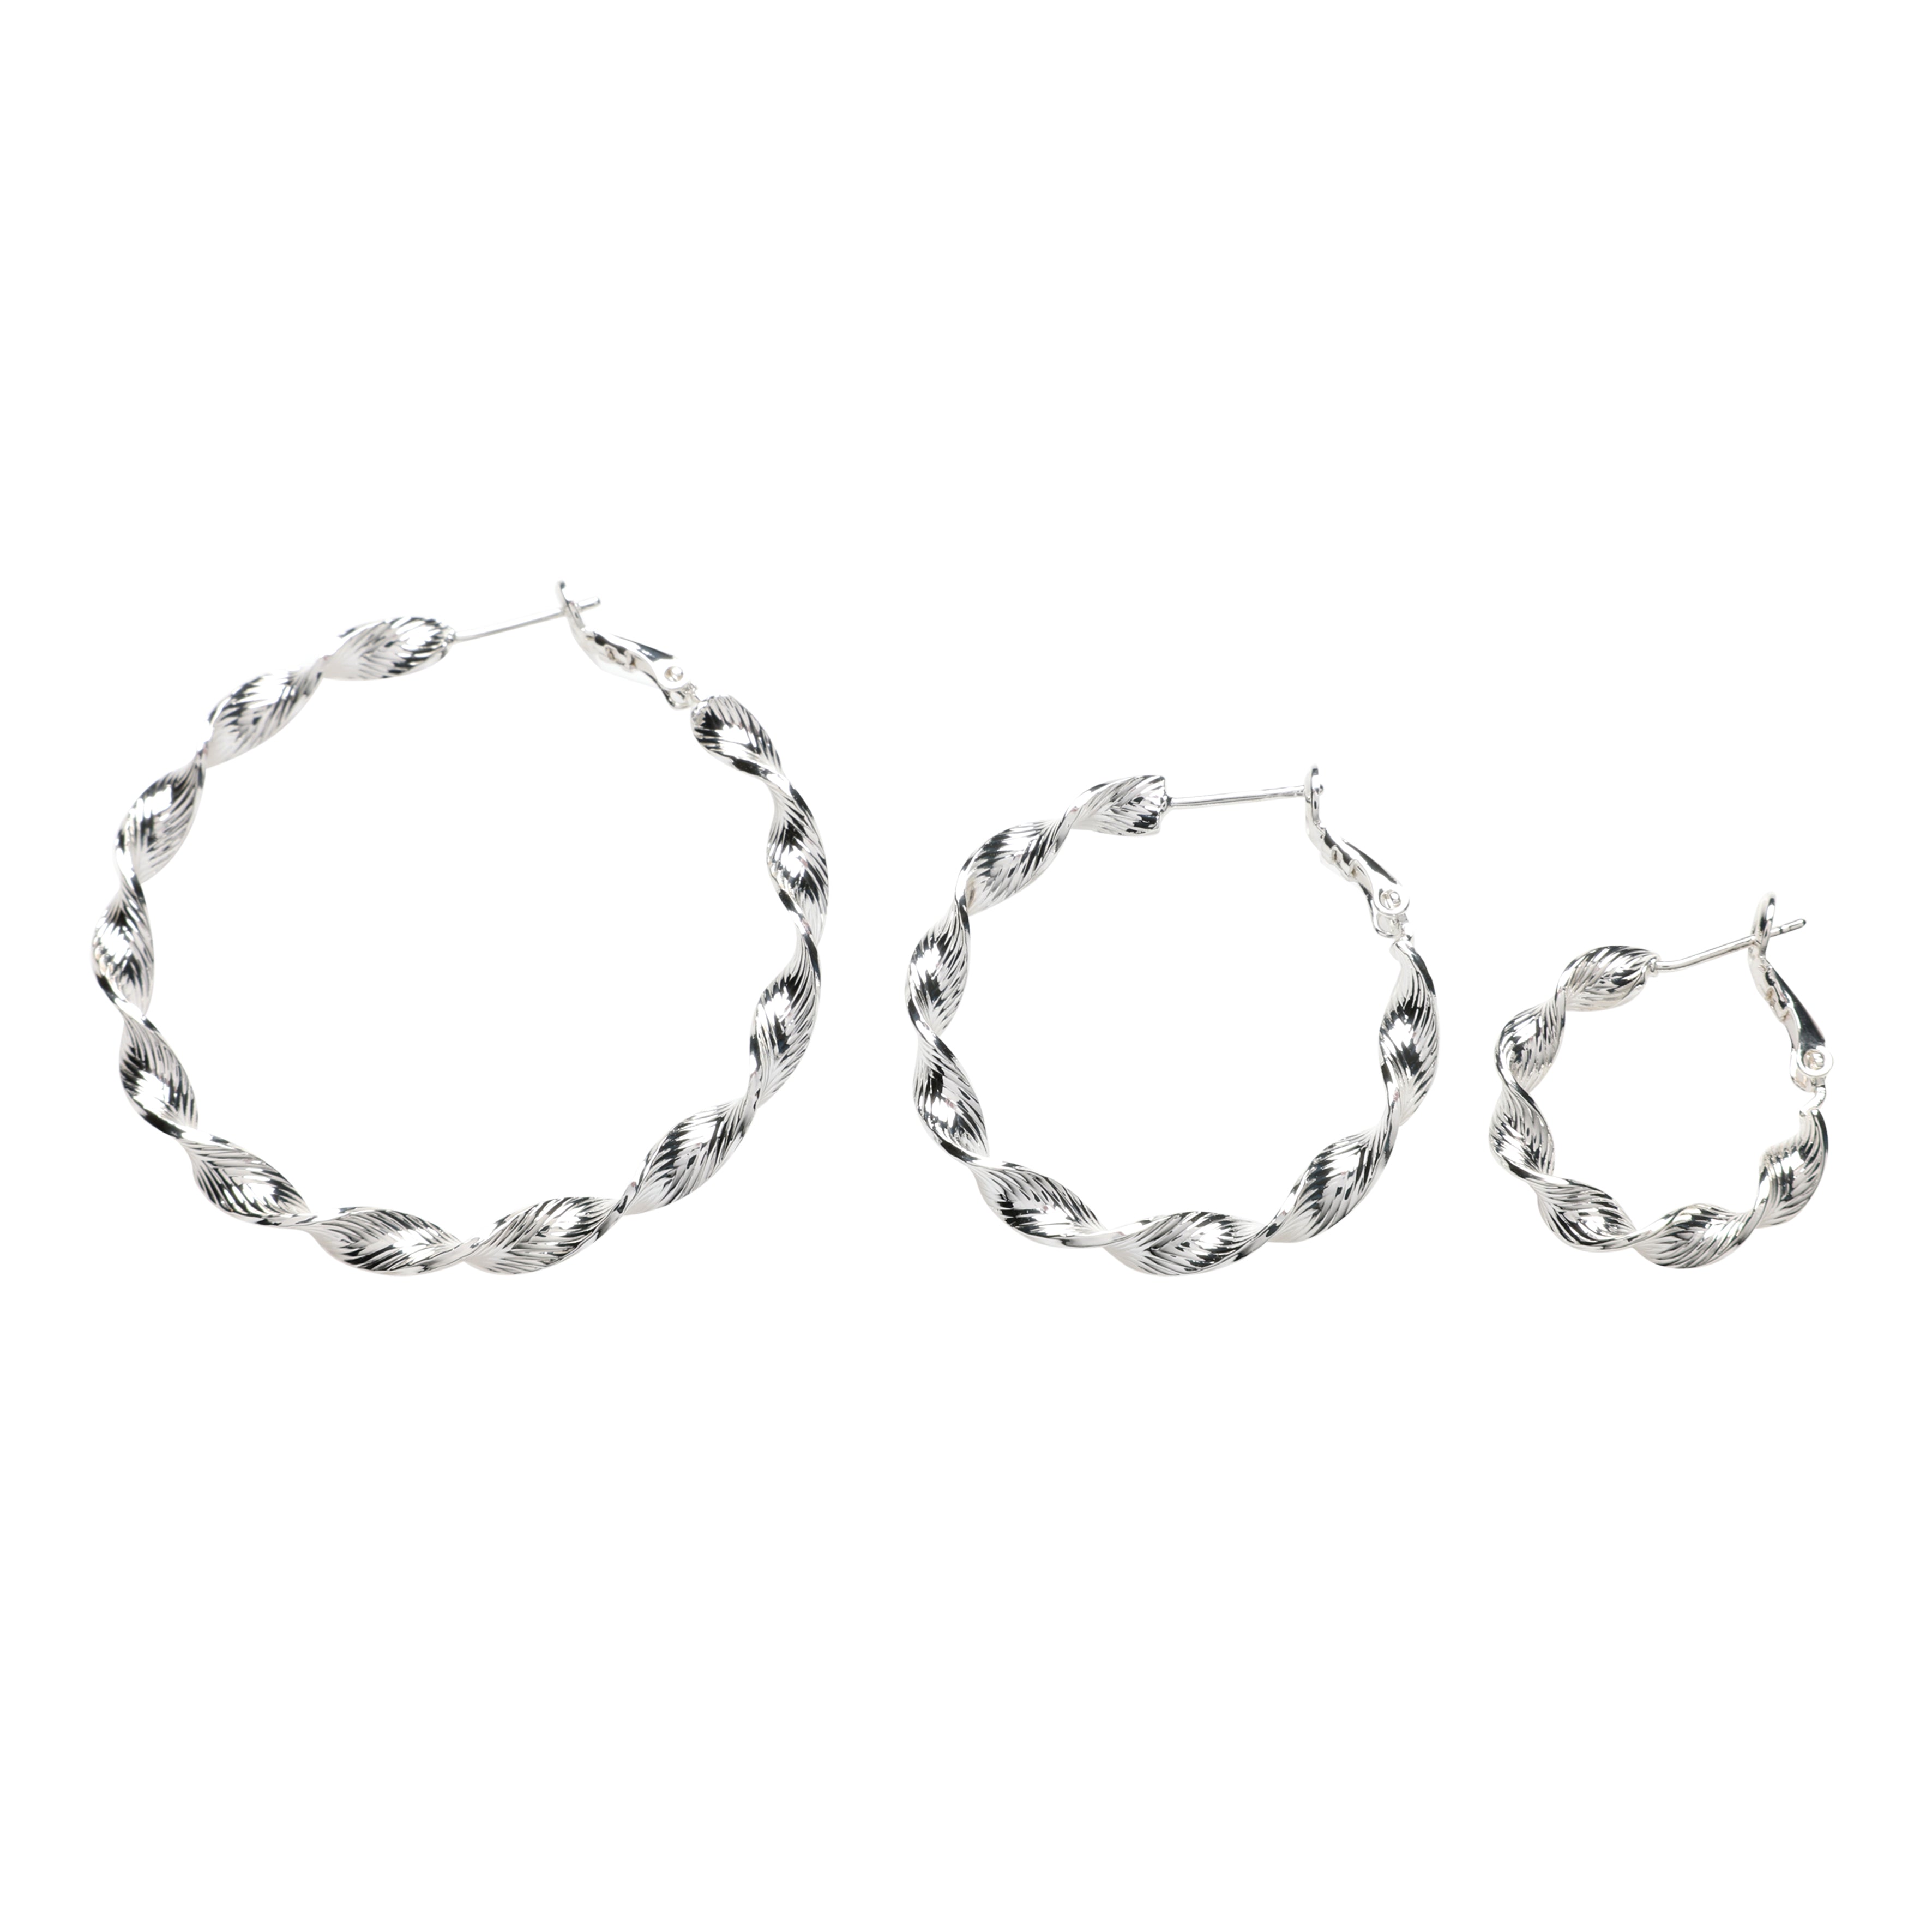 Twisted hoops - 35mm, 925S Sterling silver plated, 1 pair